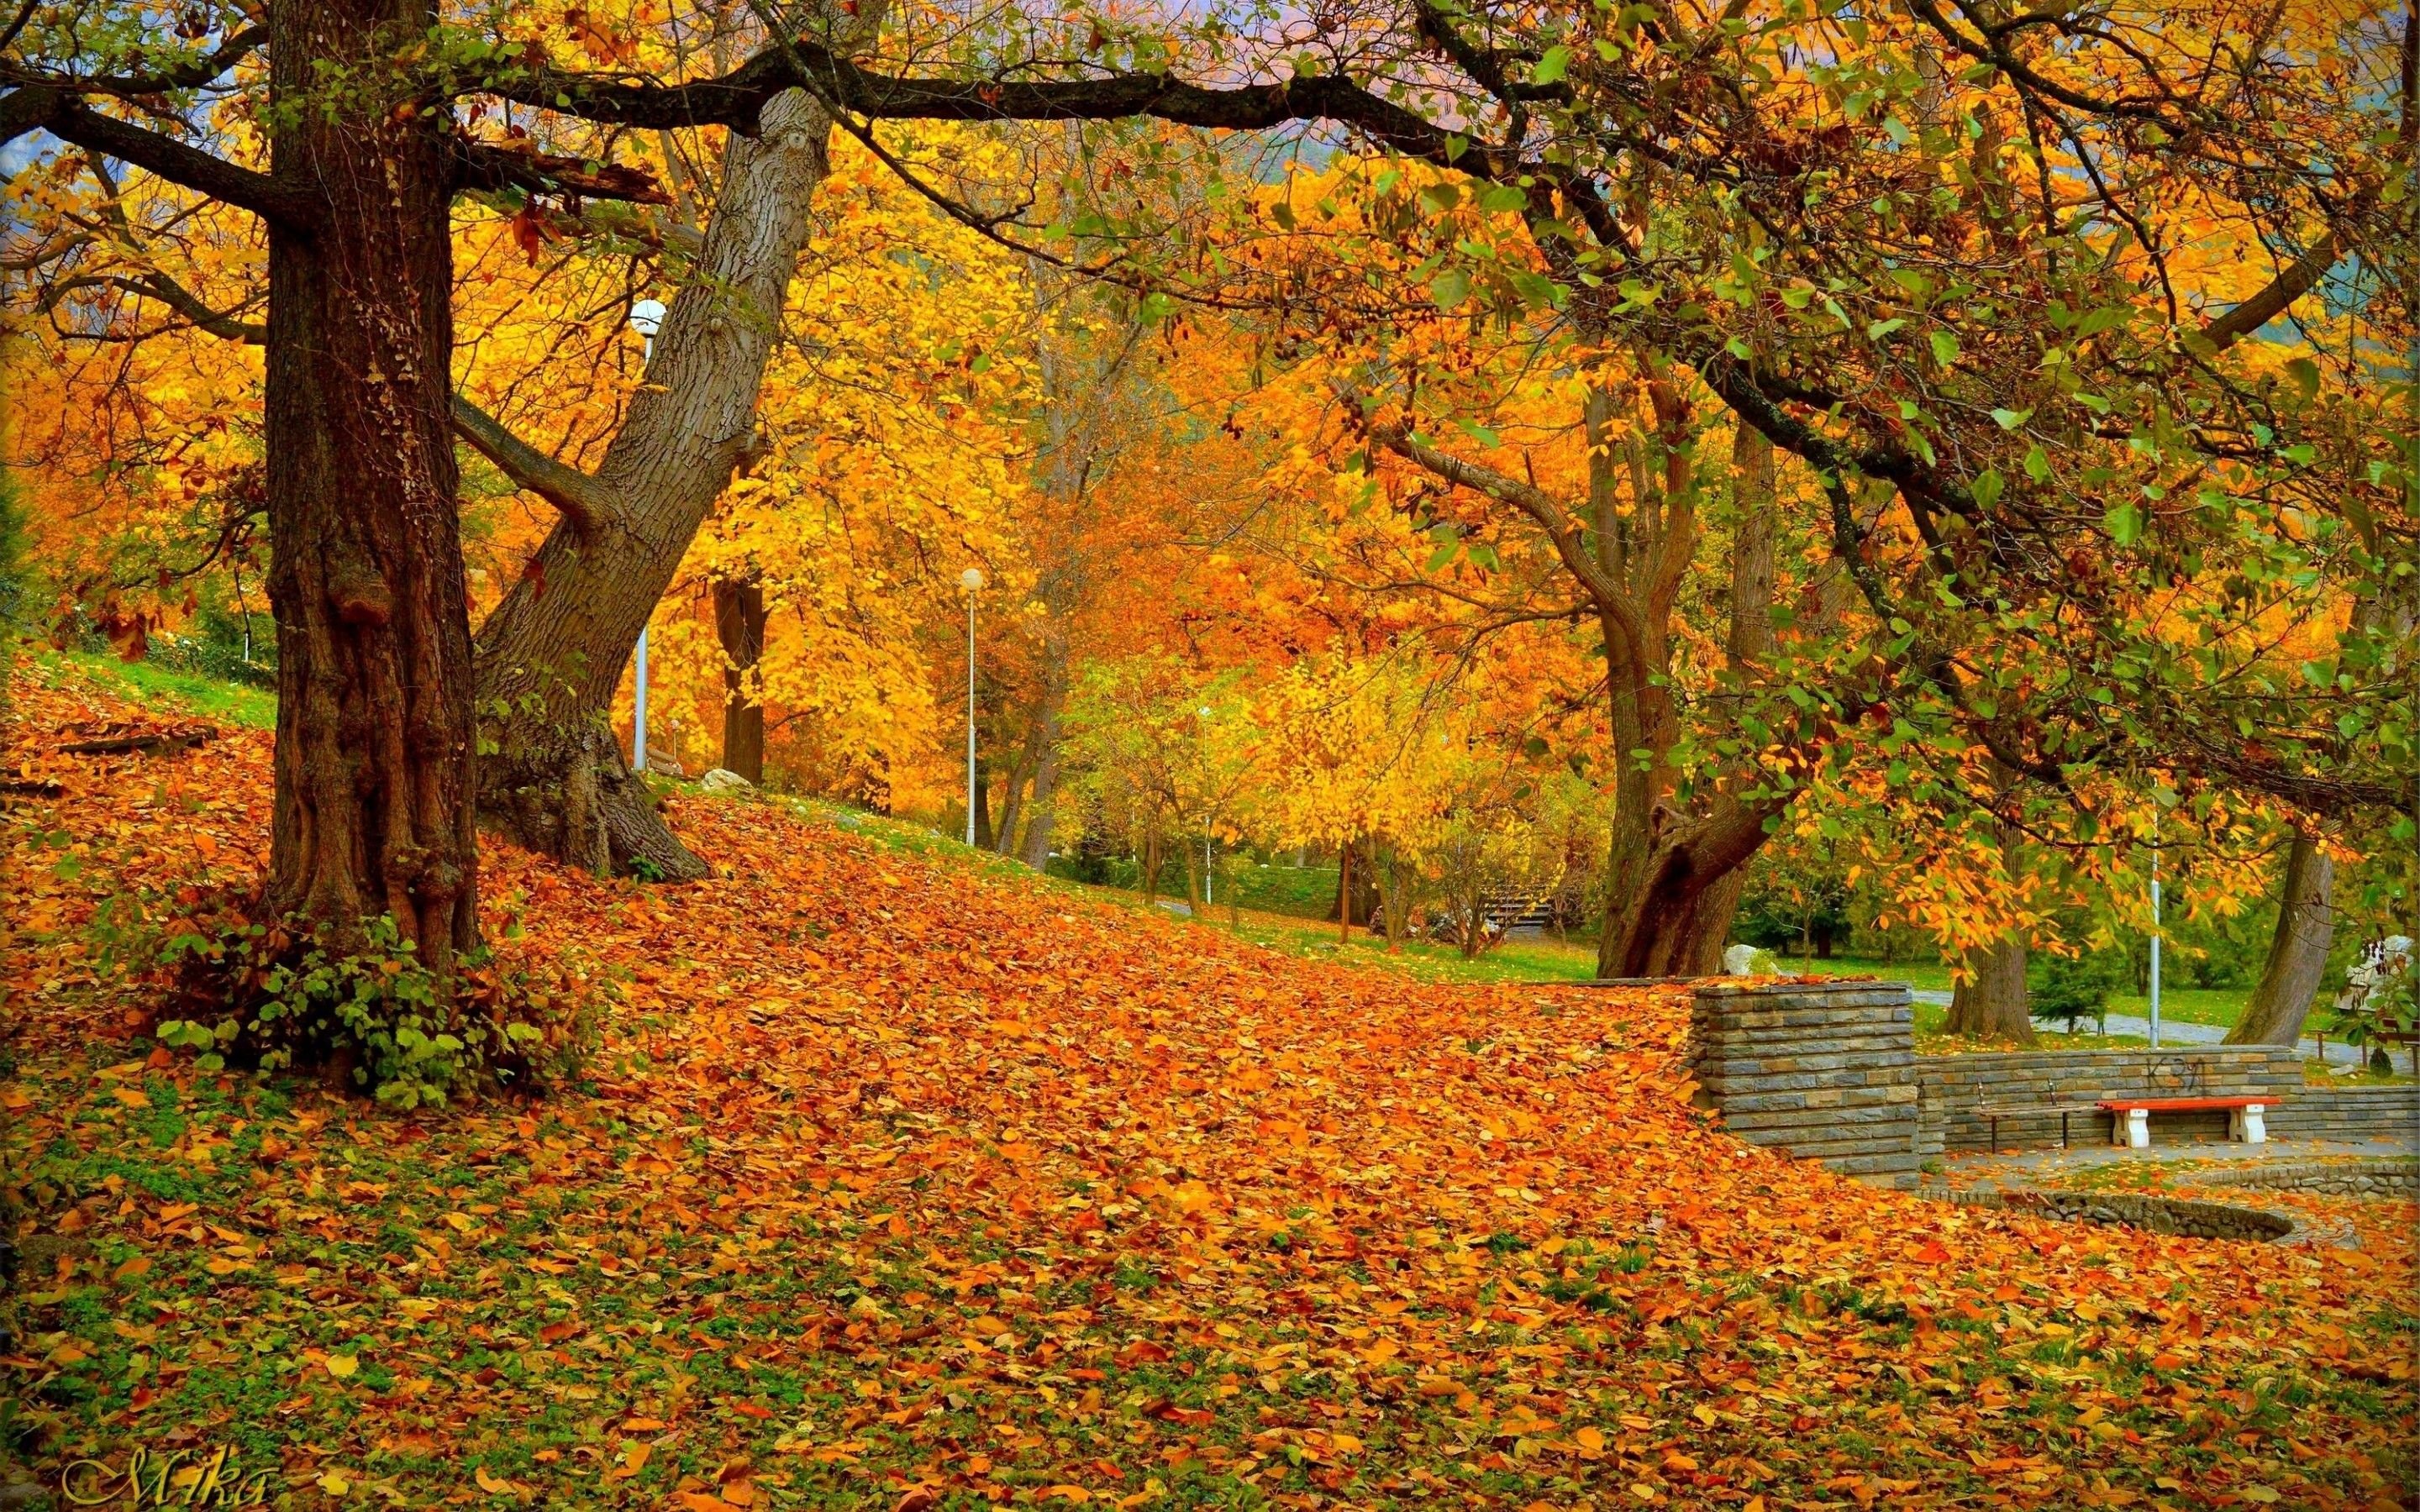 Download 2880x1800 Autumn, Park, Bench, Fall, Foliage, Scenery Wallpaper for MacBook Pro 15 inch